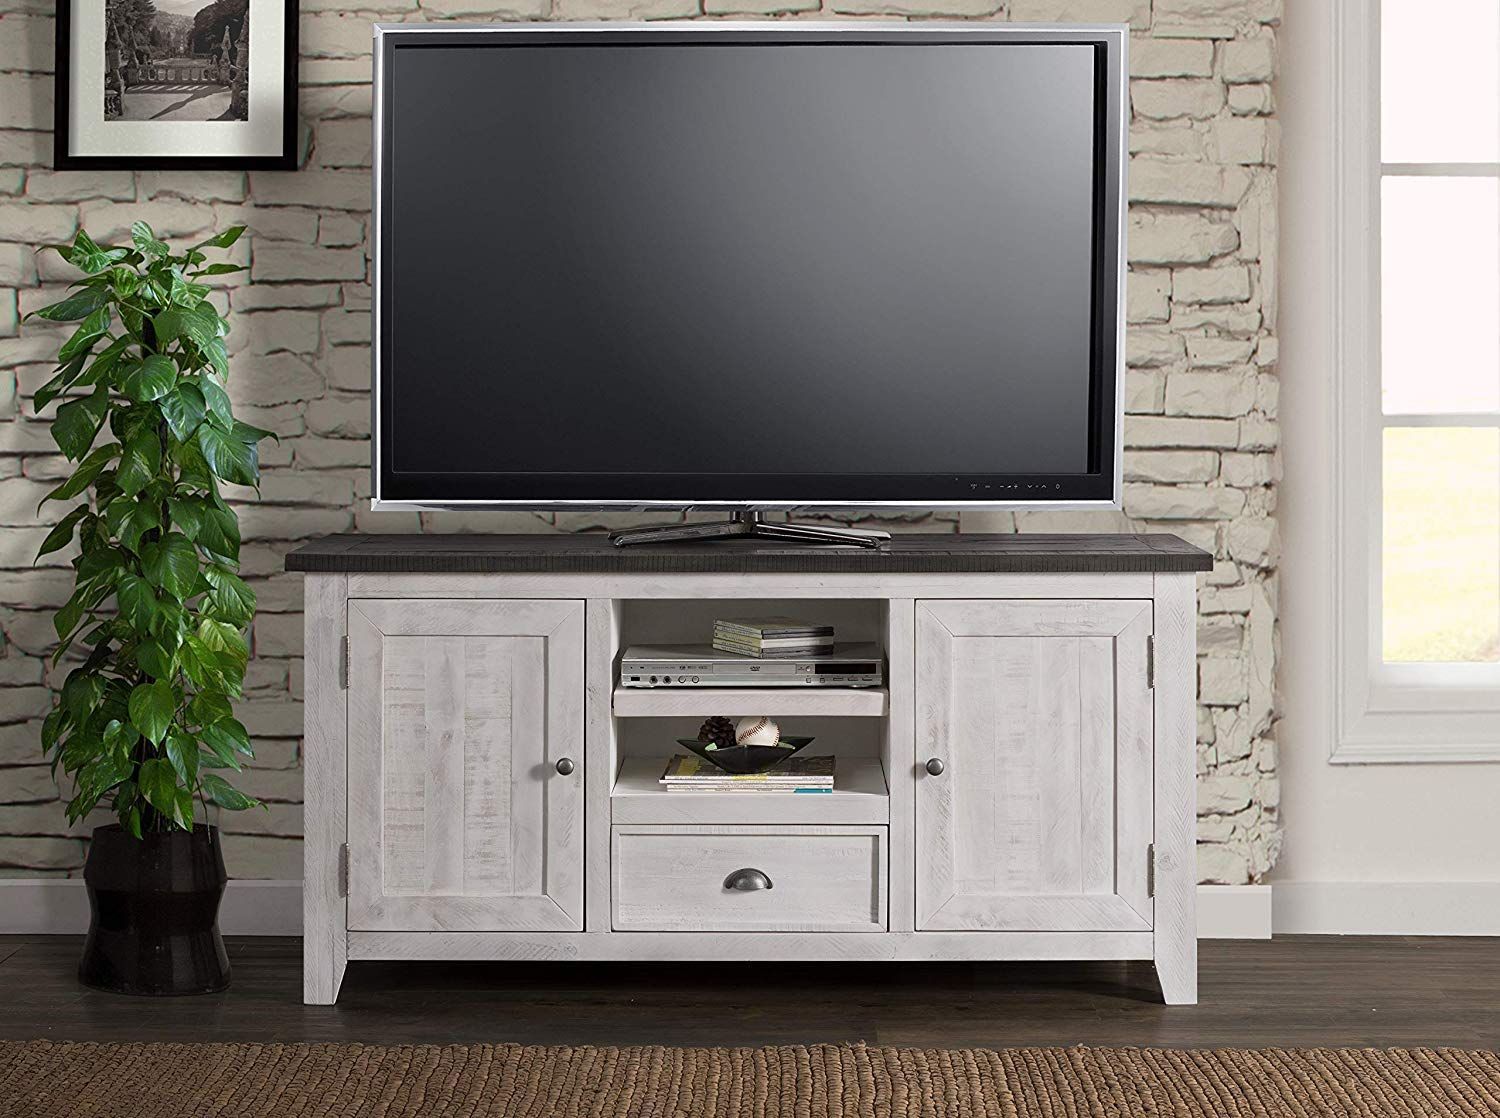 Farmhouse Tv Stand: Cozy And Functional Entertainment Centers – Farmhouse  Goals | Farmhouse Tv Stand, Rustic Tv Stand, Solid Wood Tv Stand With Regard To Farmhouse Stands For Tvs (Photo 4 of 15)